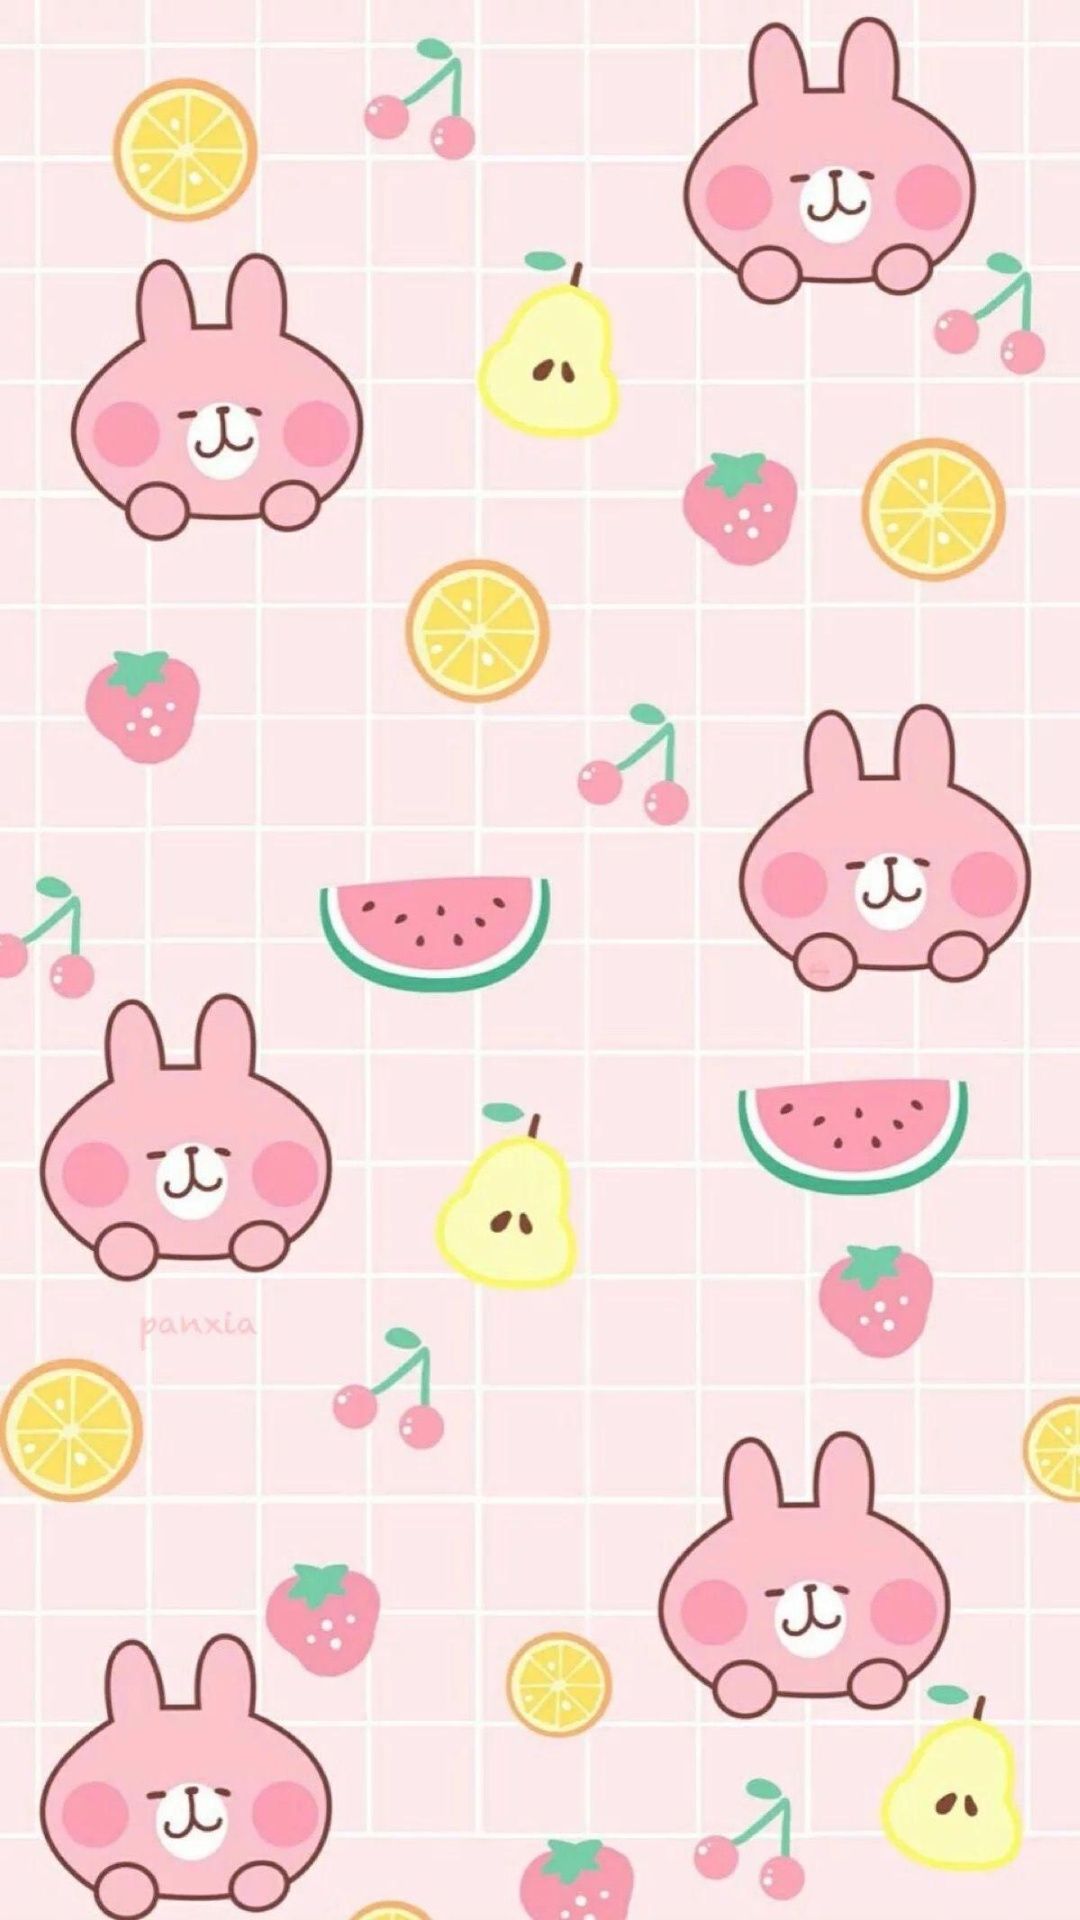 IPhone Wallpaper Rabbit with high-resolution 1080x1920 pixel. You can use this wallpaper for your iPhone 5, 6, 7, 8, X, XS, XR backgrounds, Mobile Screensaver, or iPad Lock Screen - Kawaii